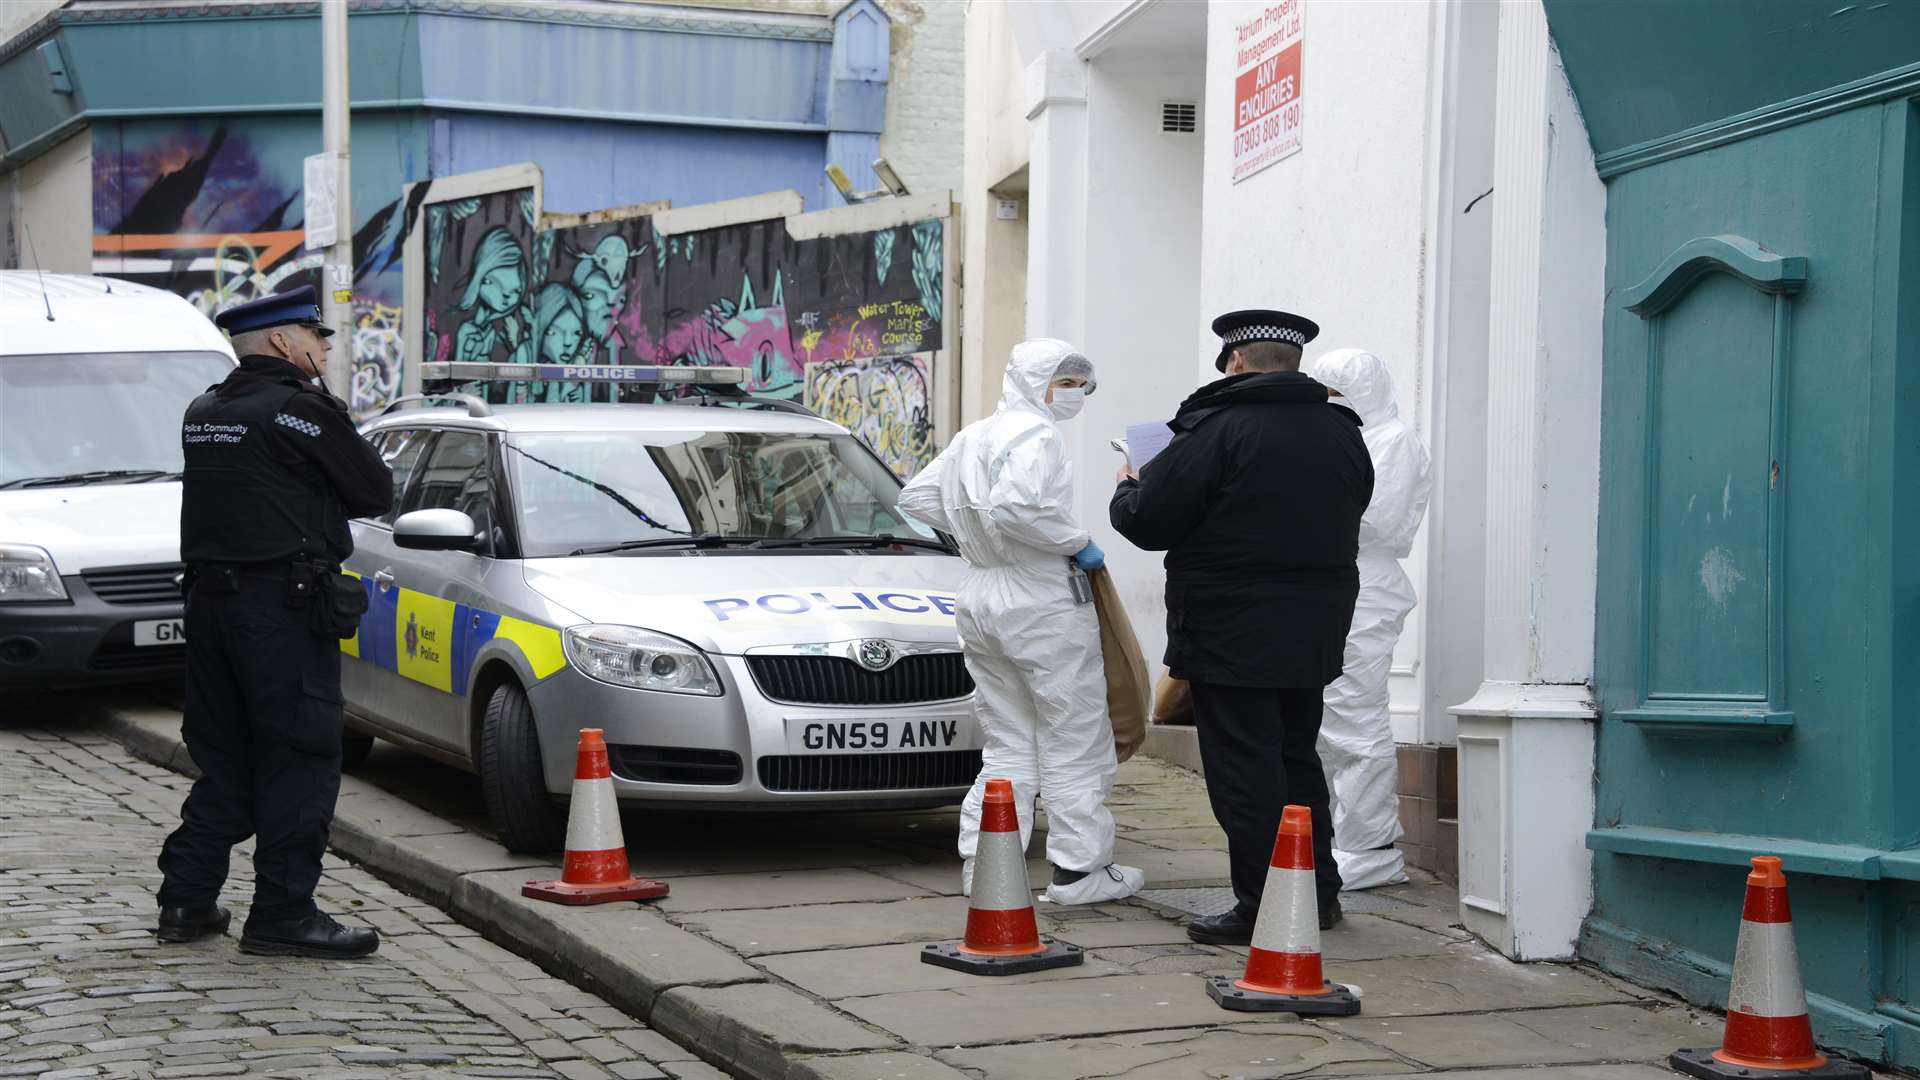 Police investigating the incident at Folkestone's Old High Street.